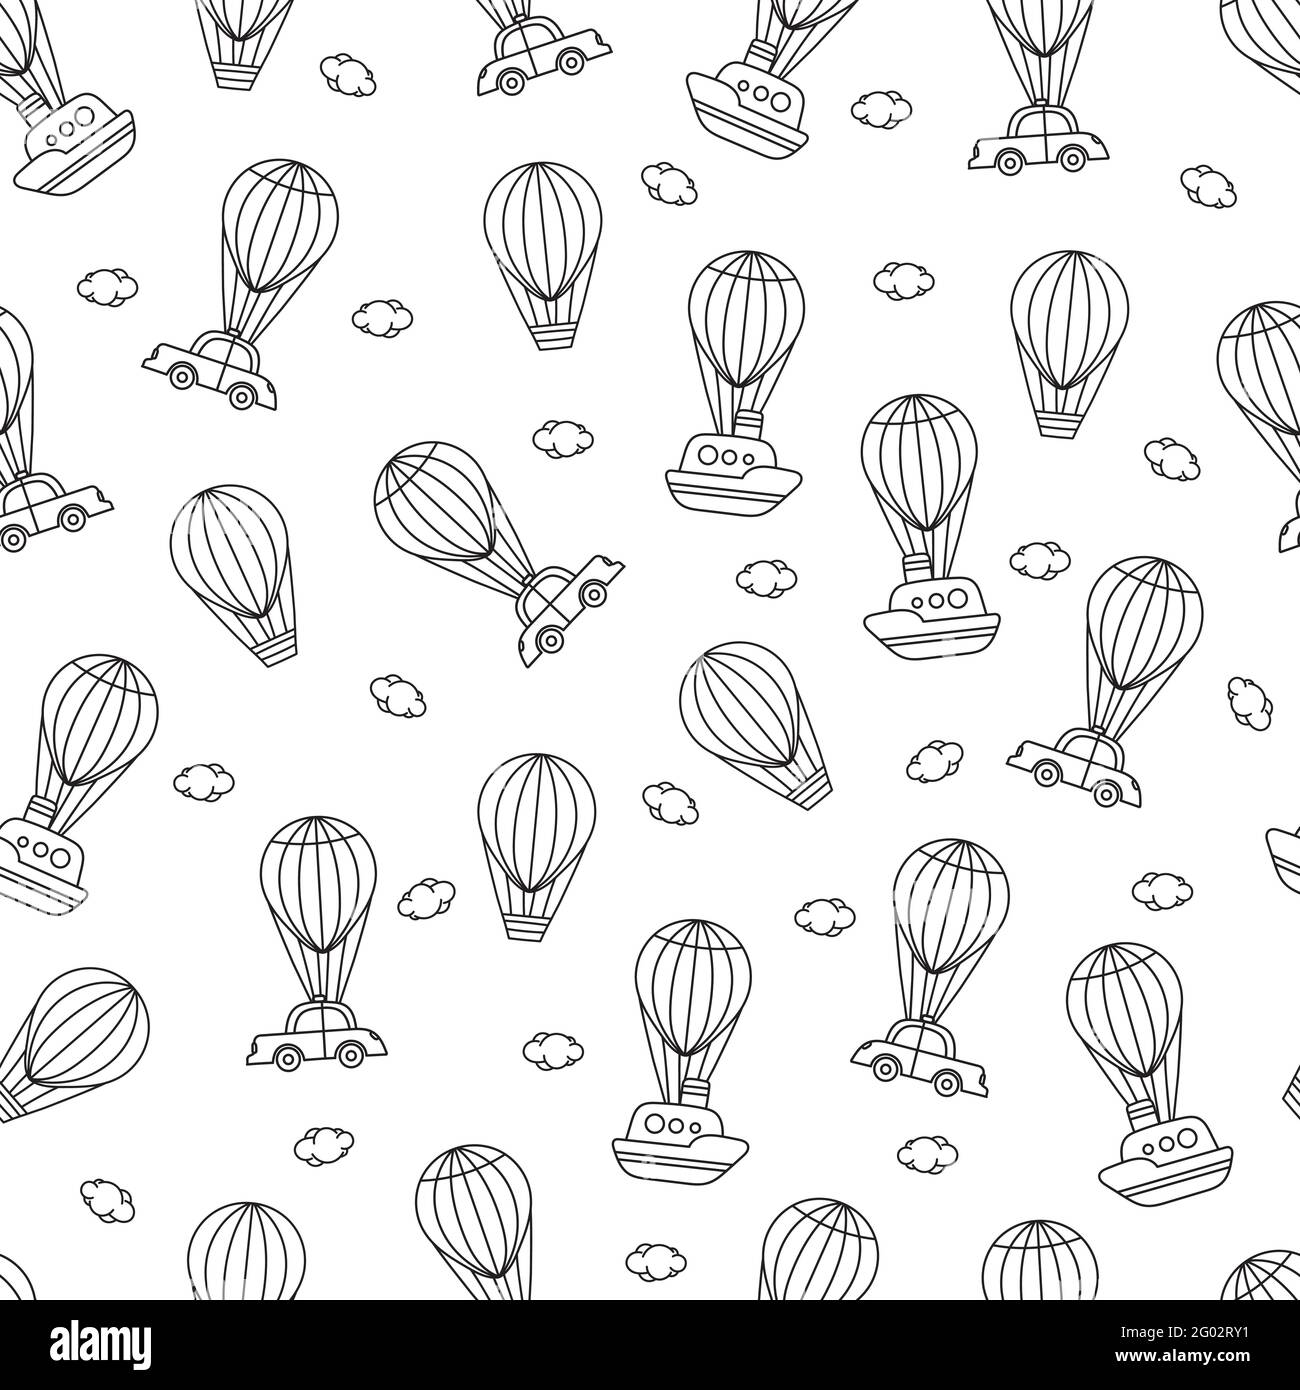 Air balloons. Seamless vector pattern with cute air balloons and clouds, with flying cars and ships. Cute vector illustration Stock Vector